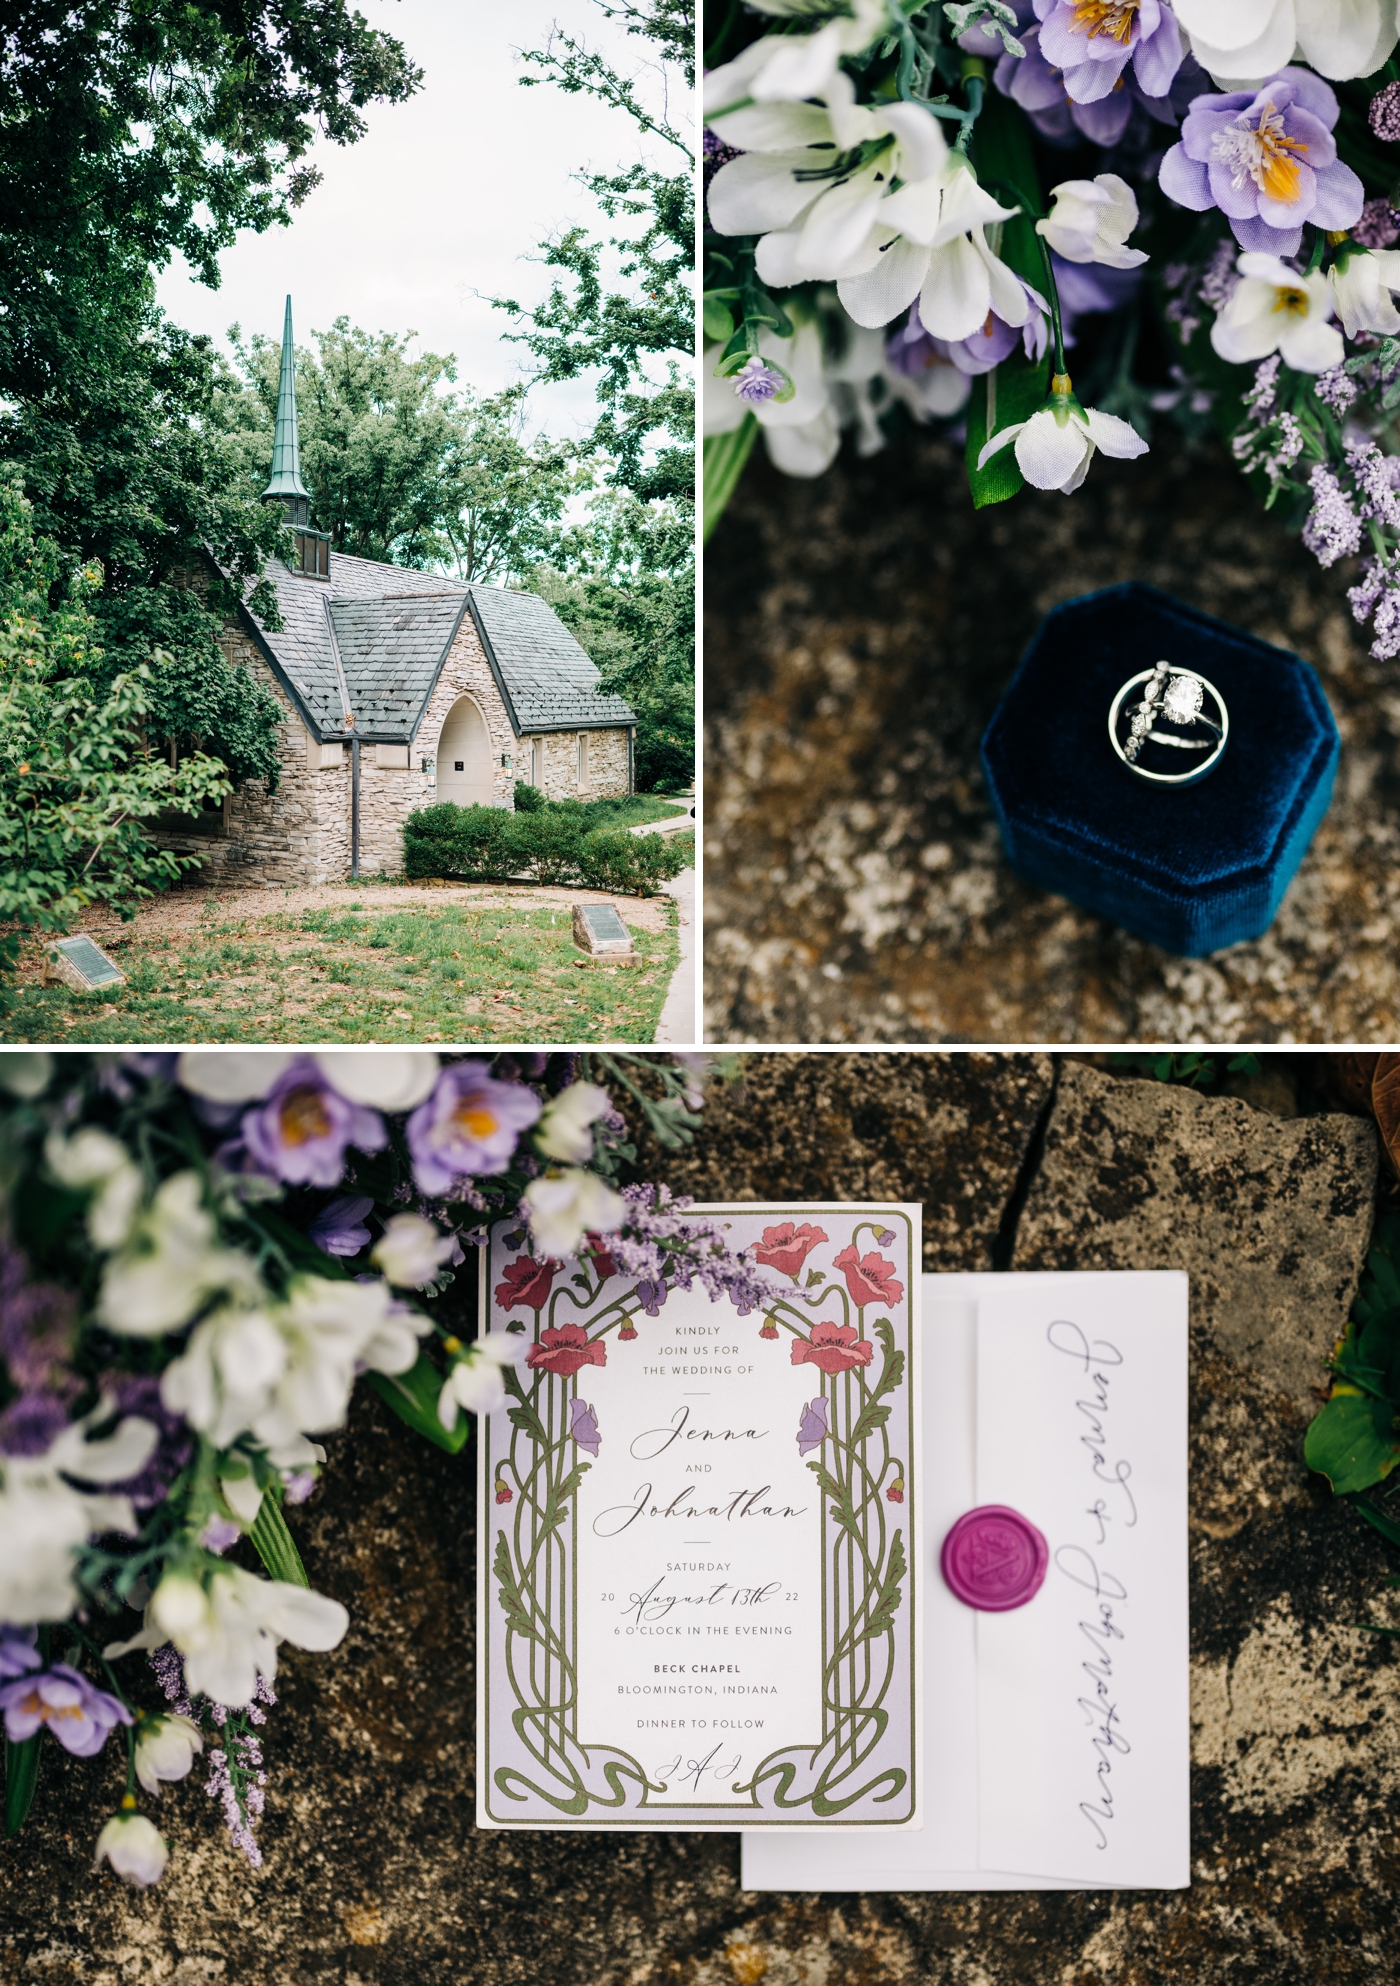 Turquoise ring box and lavender wedding invitations for a wedding at beck chapel